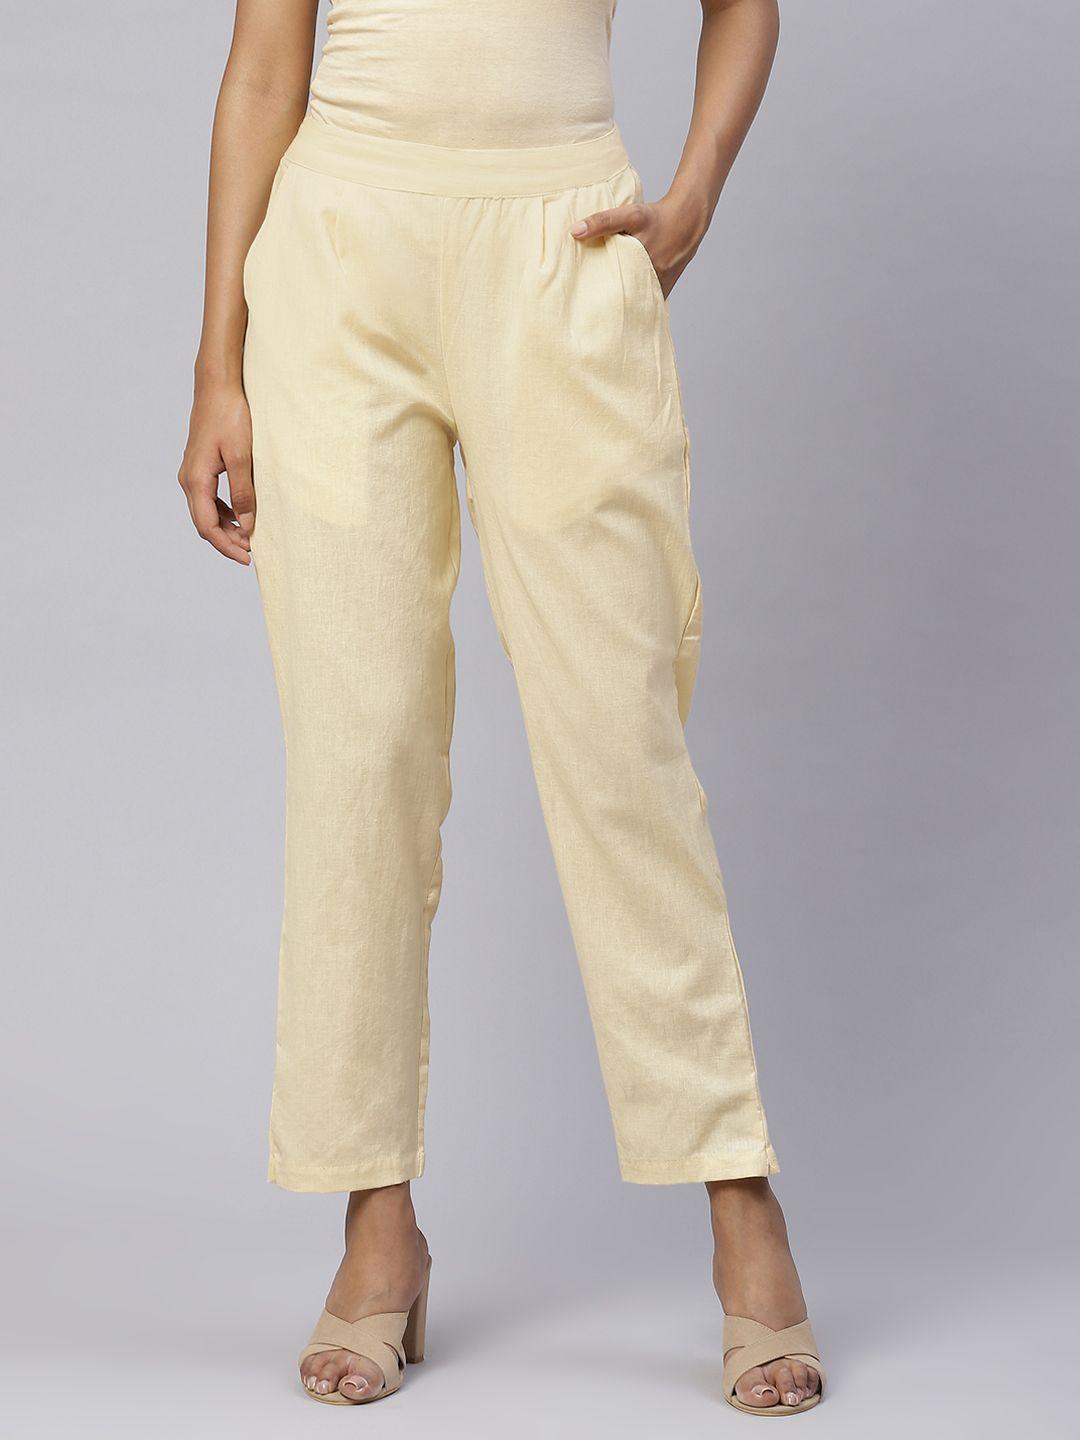 svarchi-women-cream-coloured-pure-cotton-relaxed-easy-wash-pleated-trousers